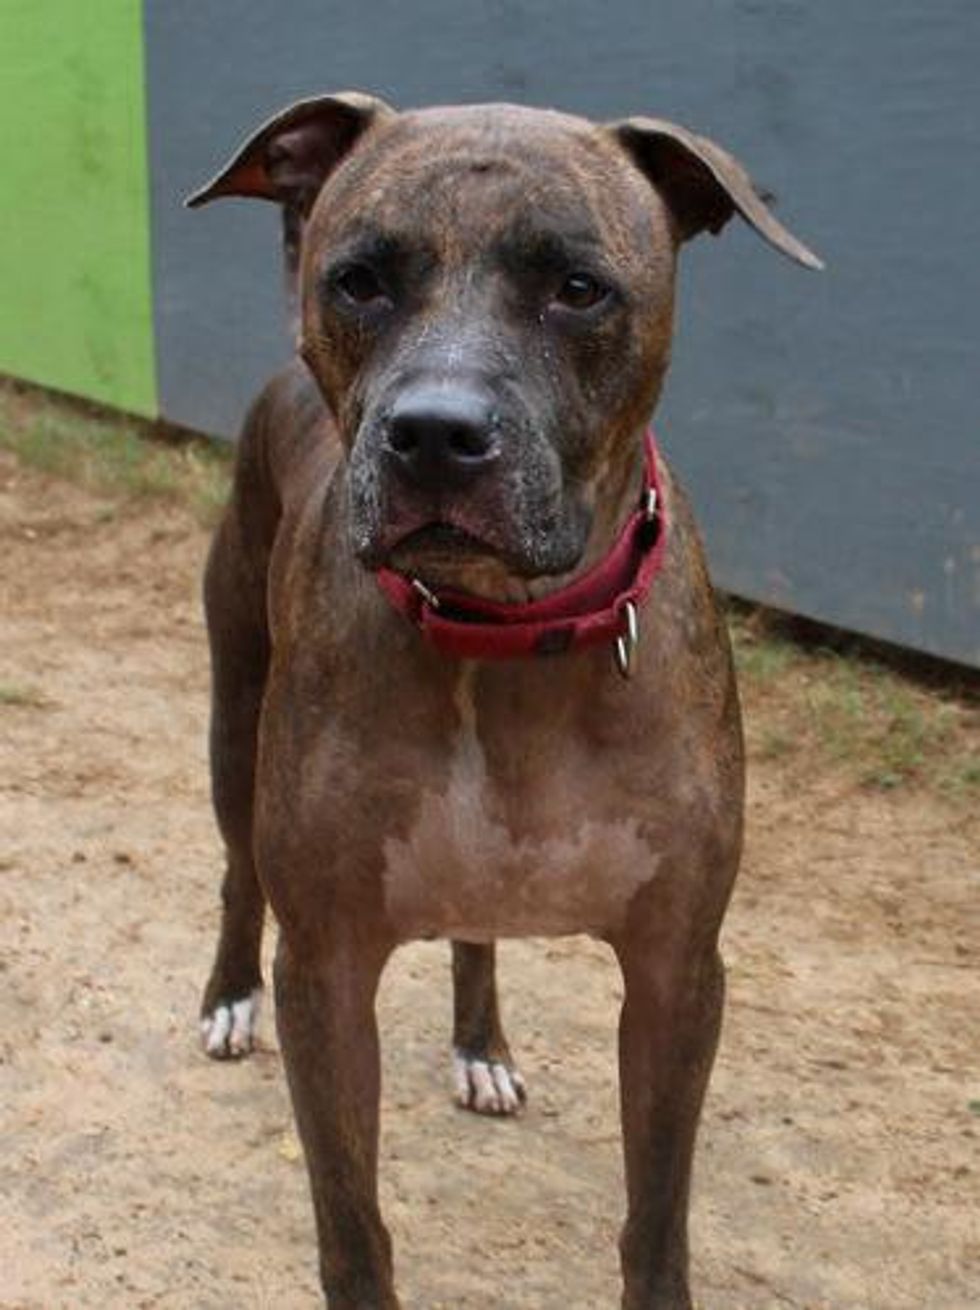 Picture this Pet - Austin Pets Alive - Brodie 3 - January 2015